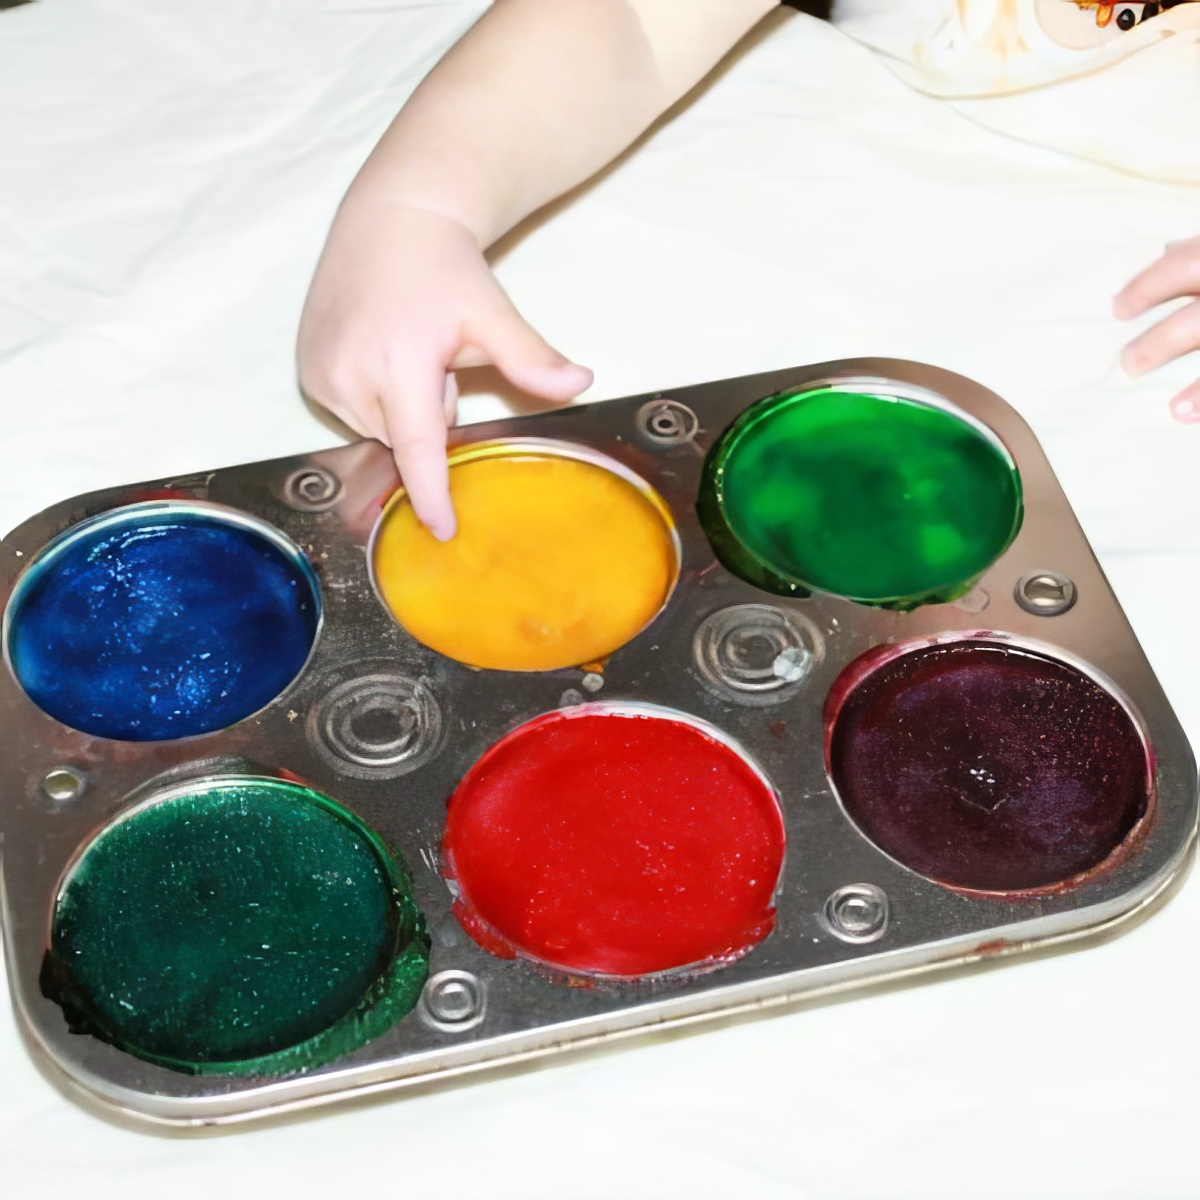 Follow the tutorial on how to do this edible sensory paints for your little ones!